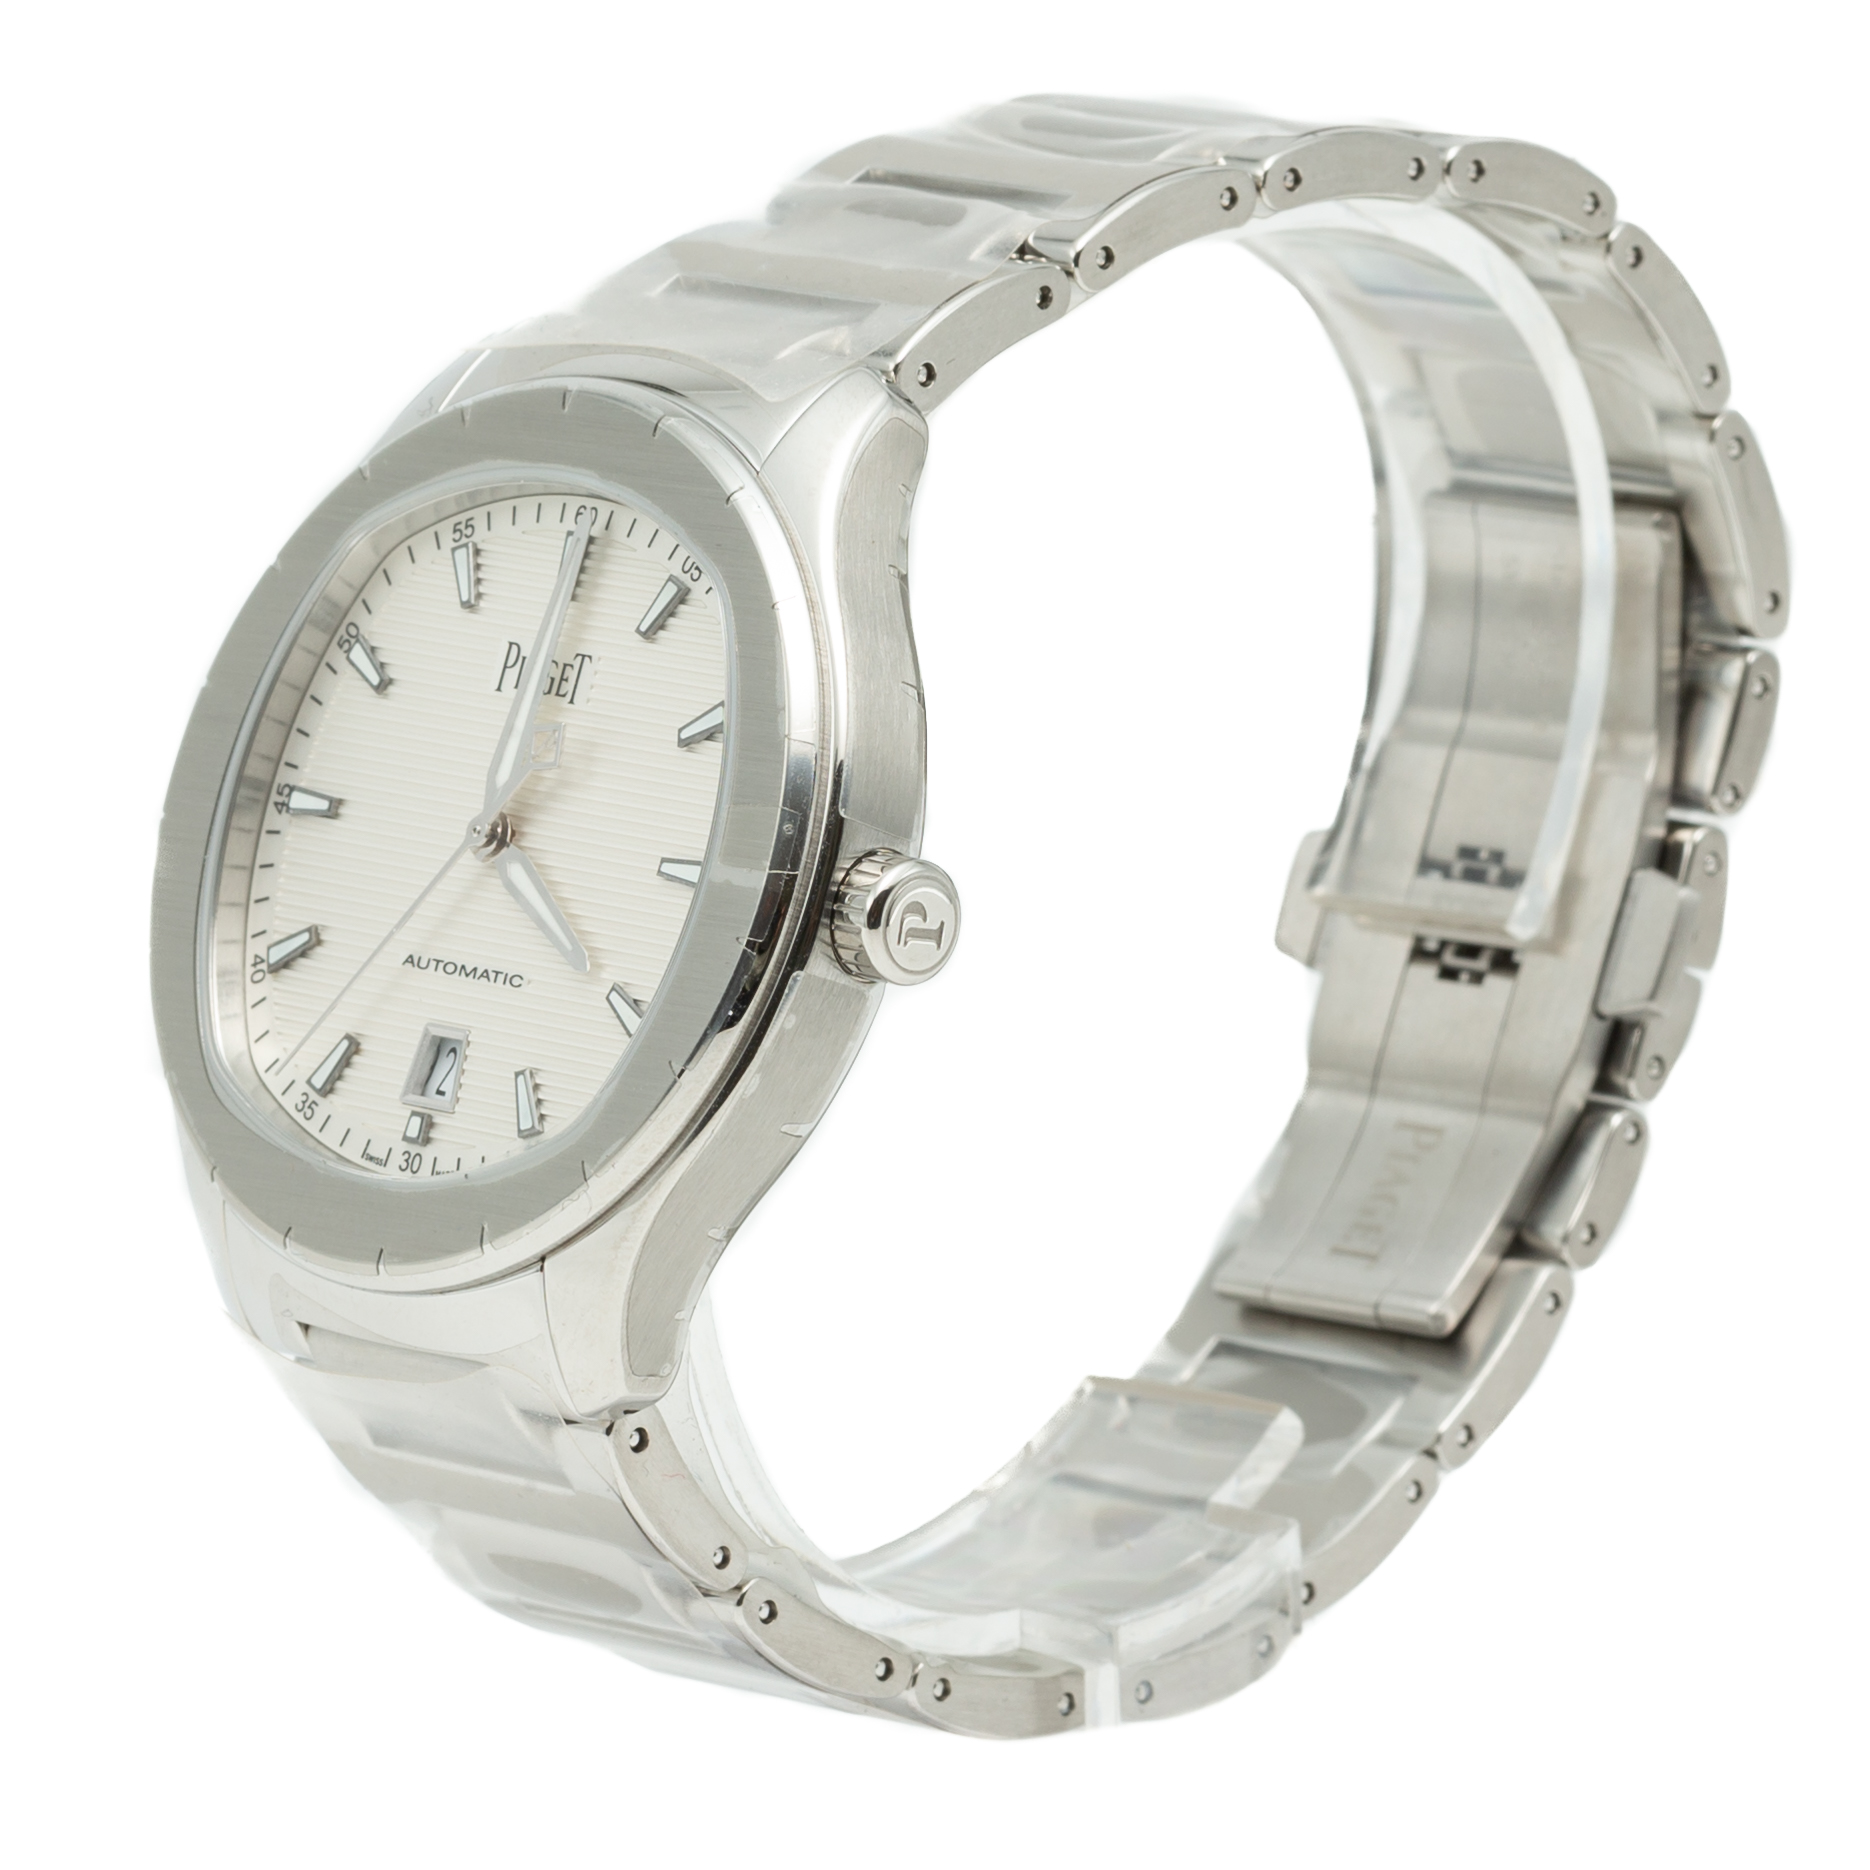 Piaget White Polo S Stainless Steel Automatic Men'S Watch